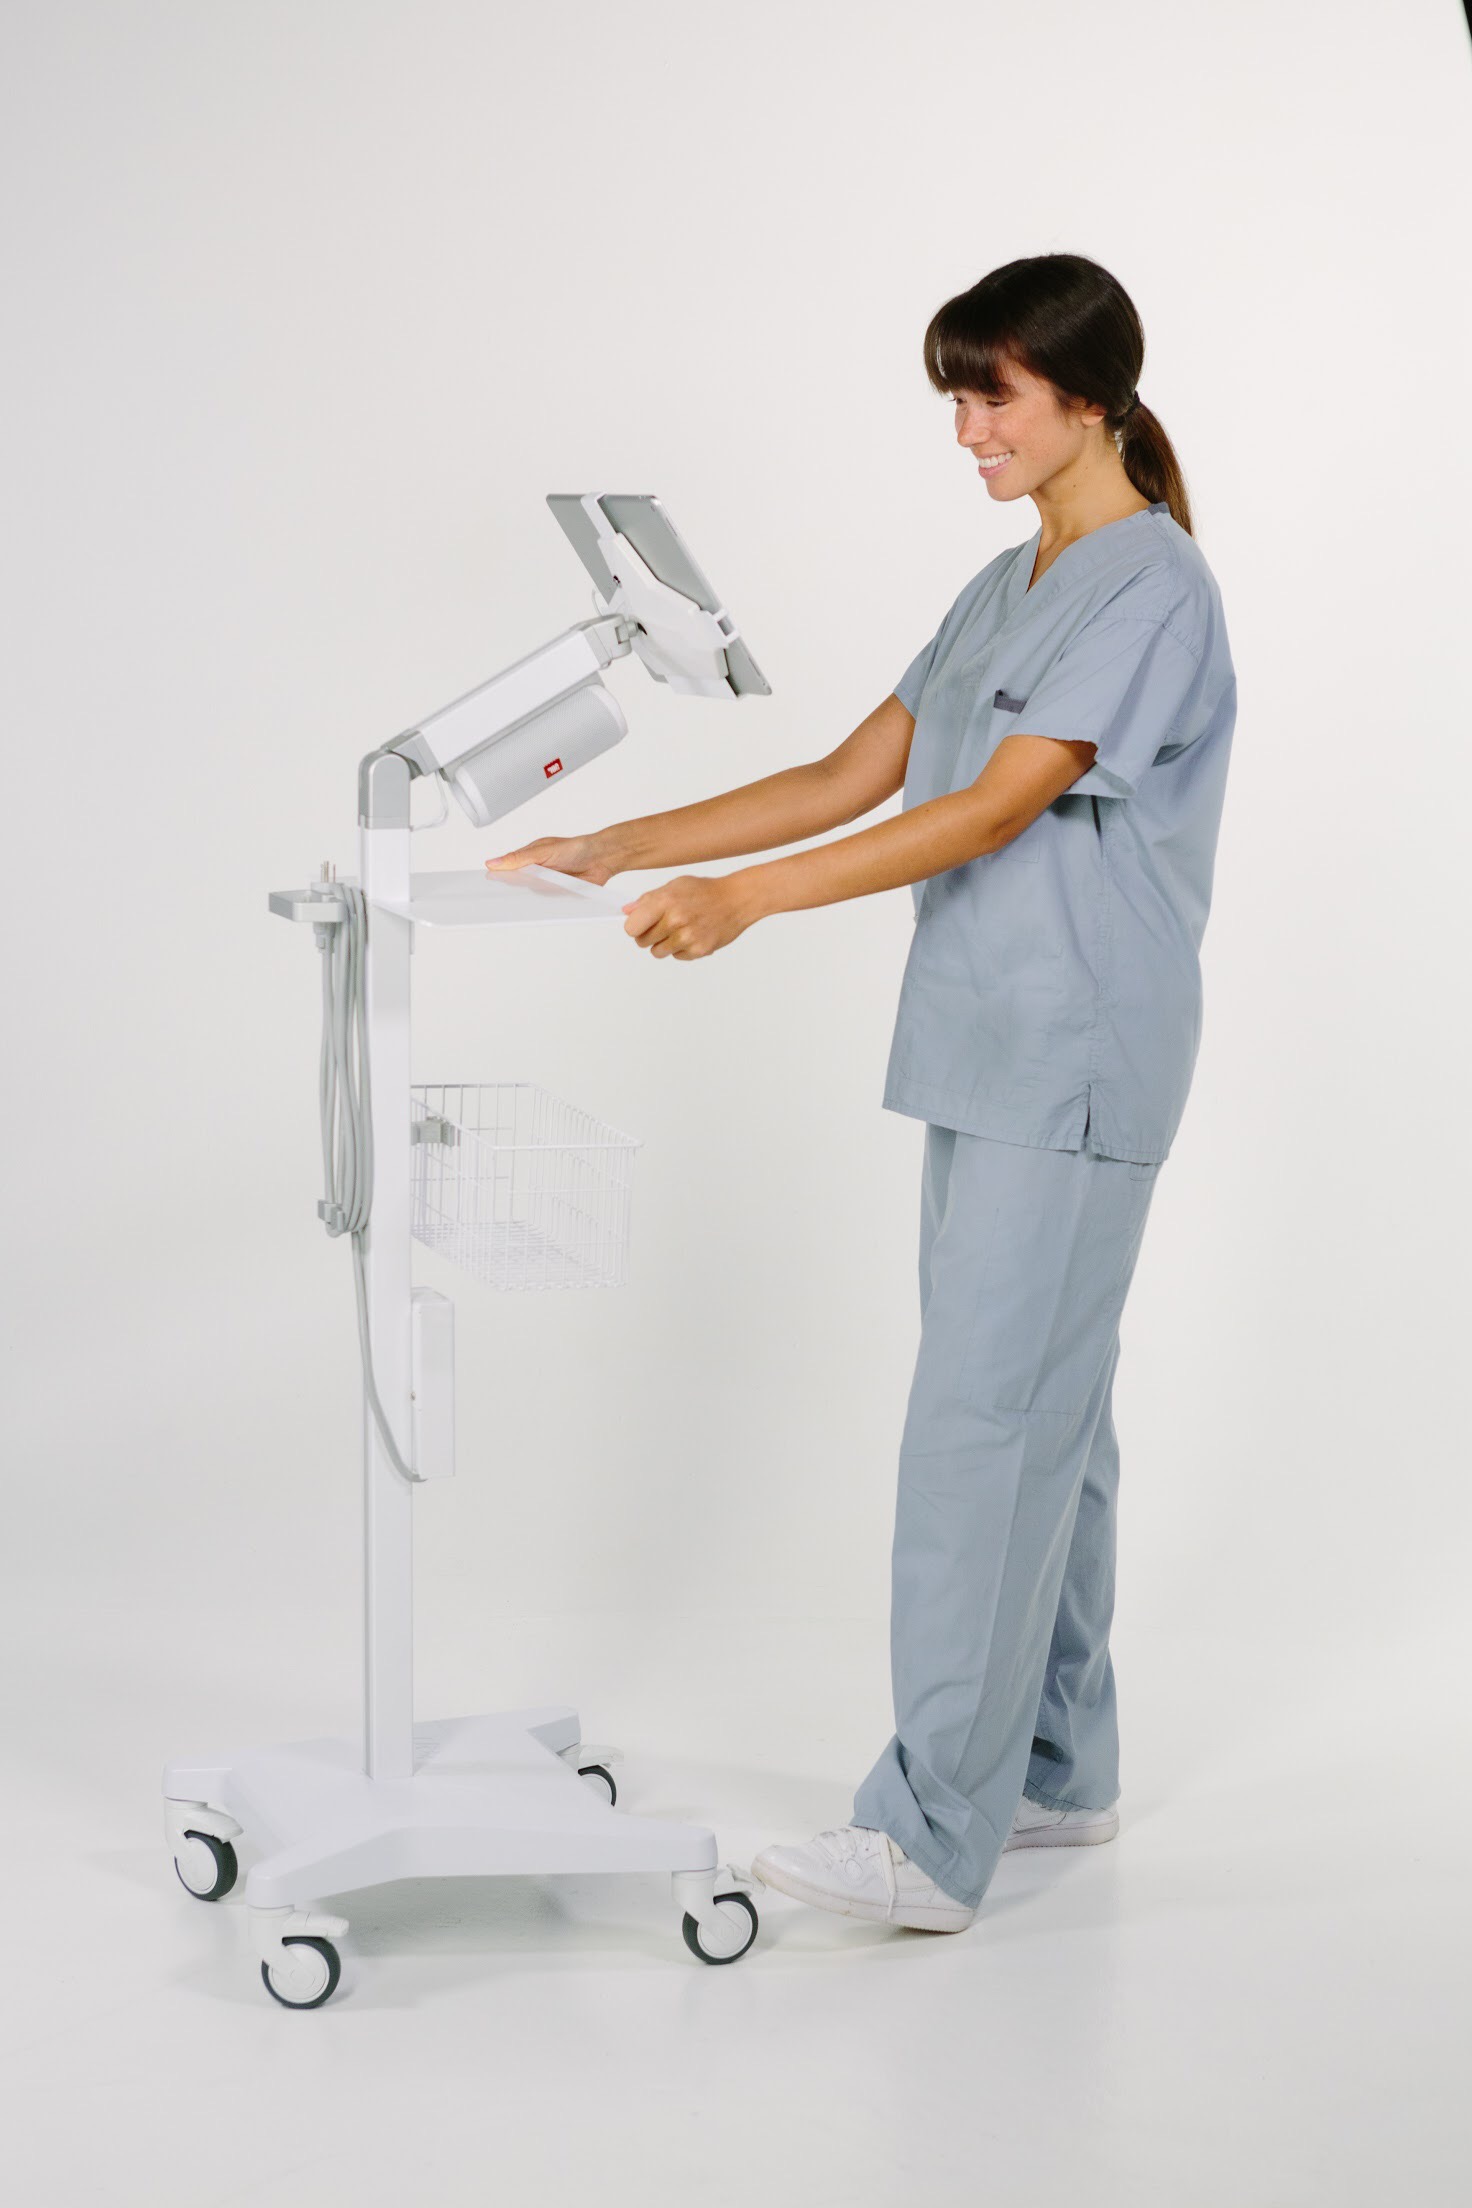 Best telehealth carts from Boostlingo and Tryten